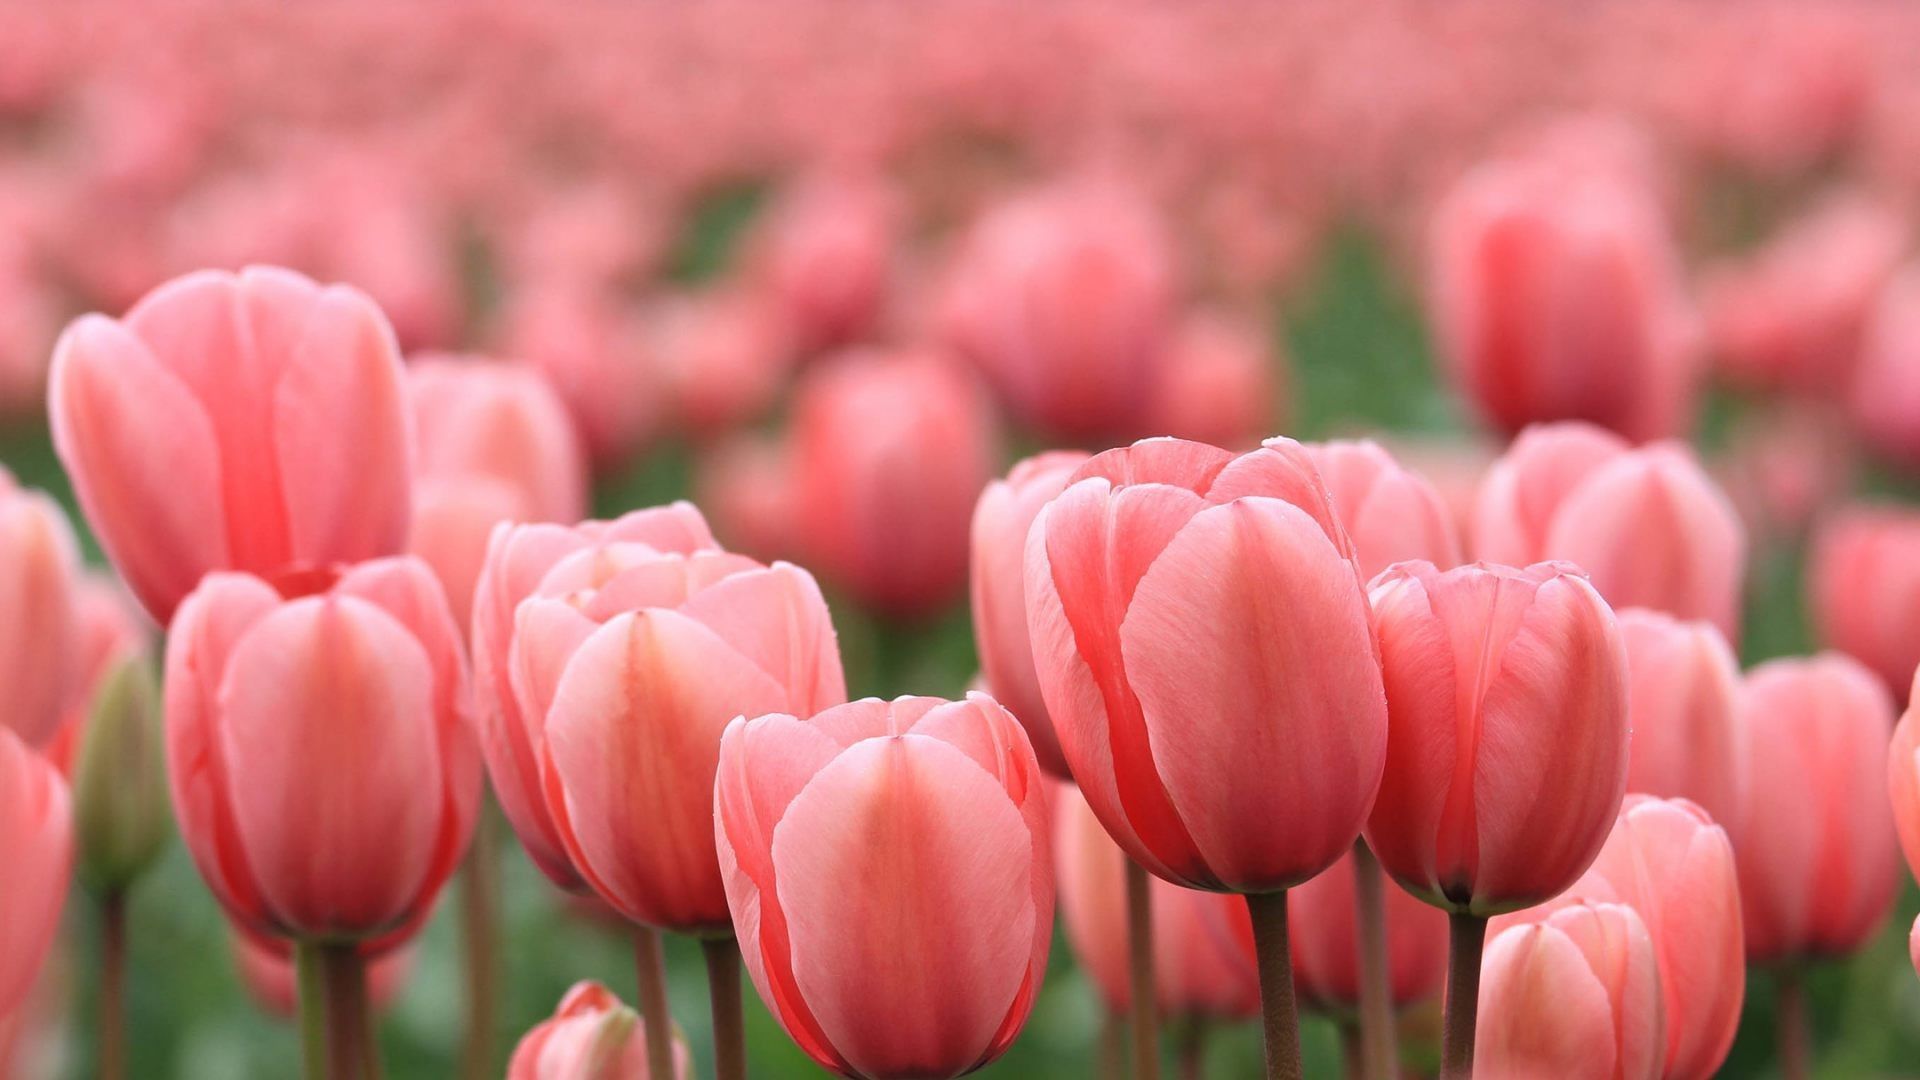 A field of pink tulips with a soft focus - Tulip